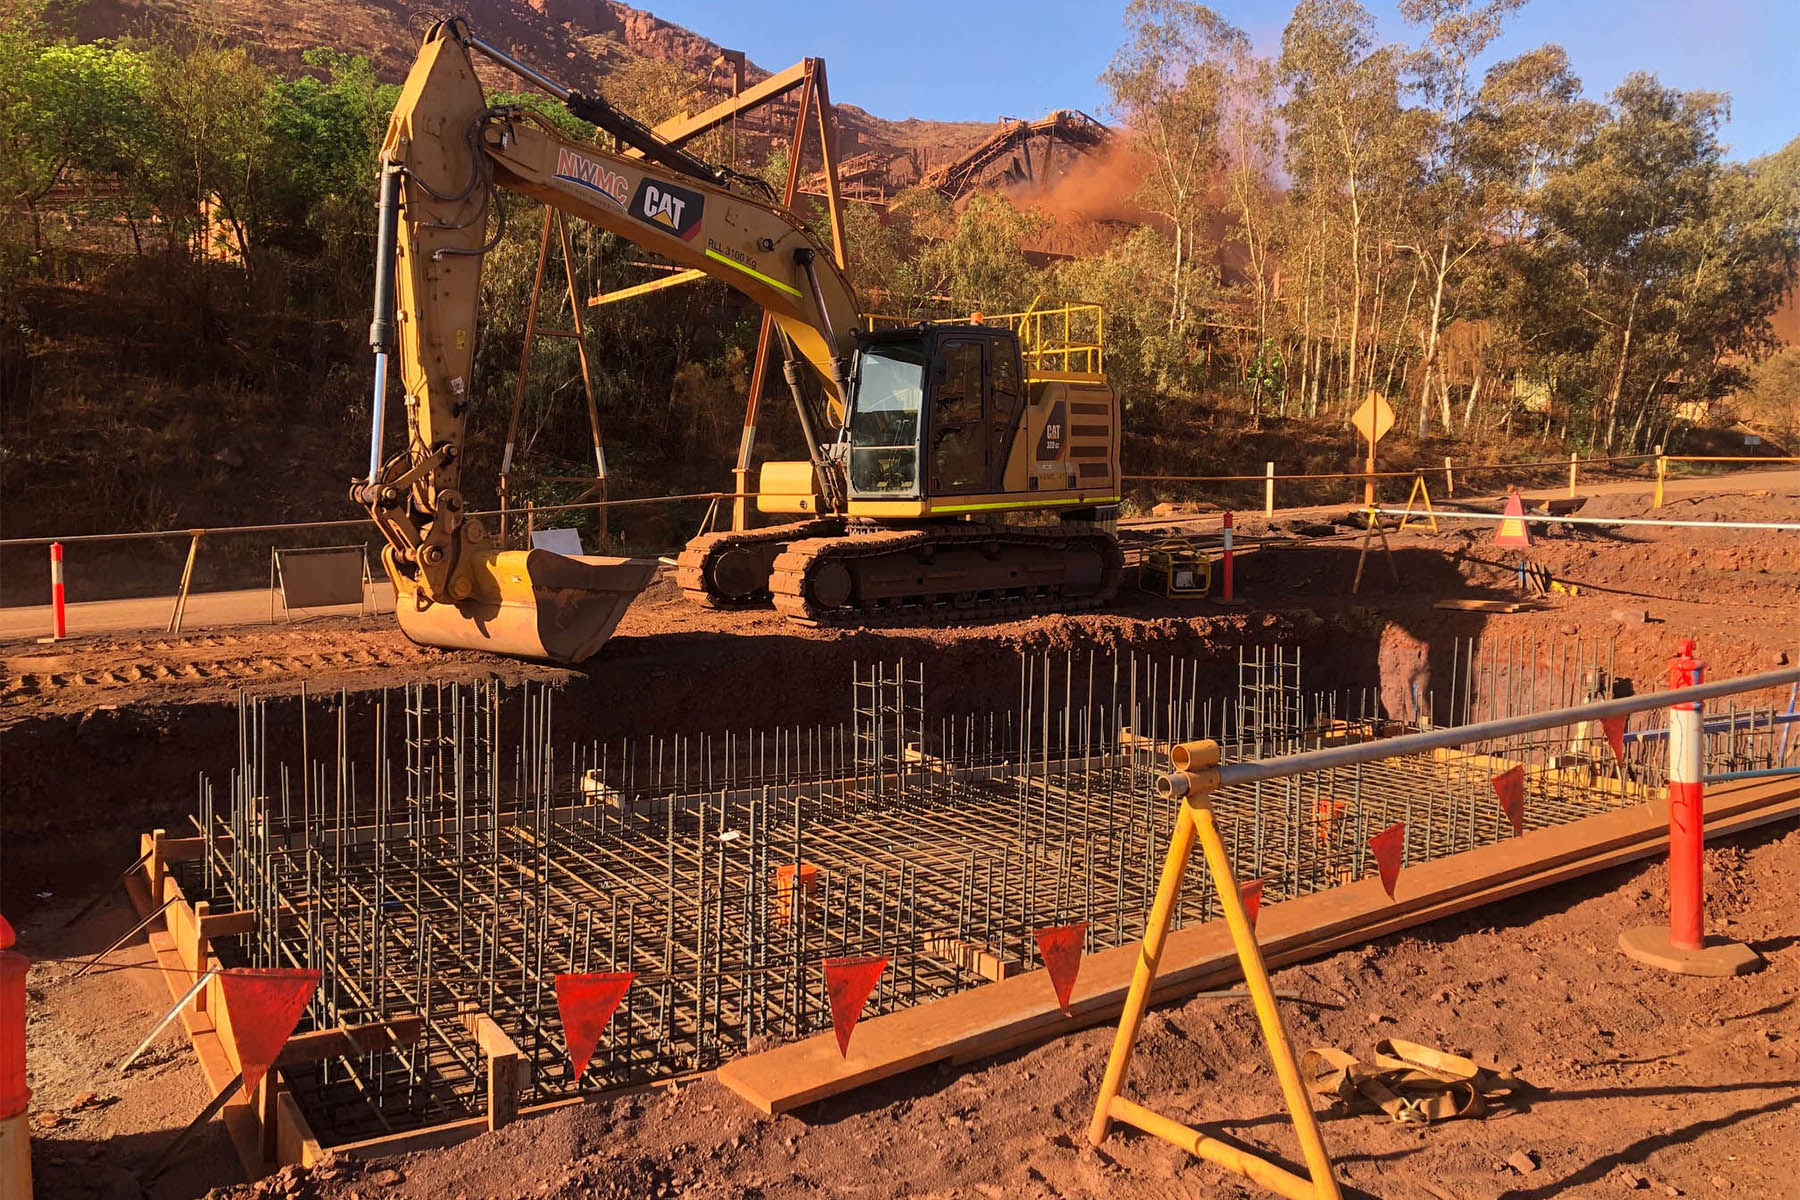 a photo of a civil construction job set up on in the Pilbara